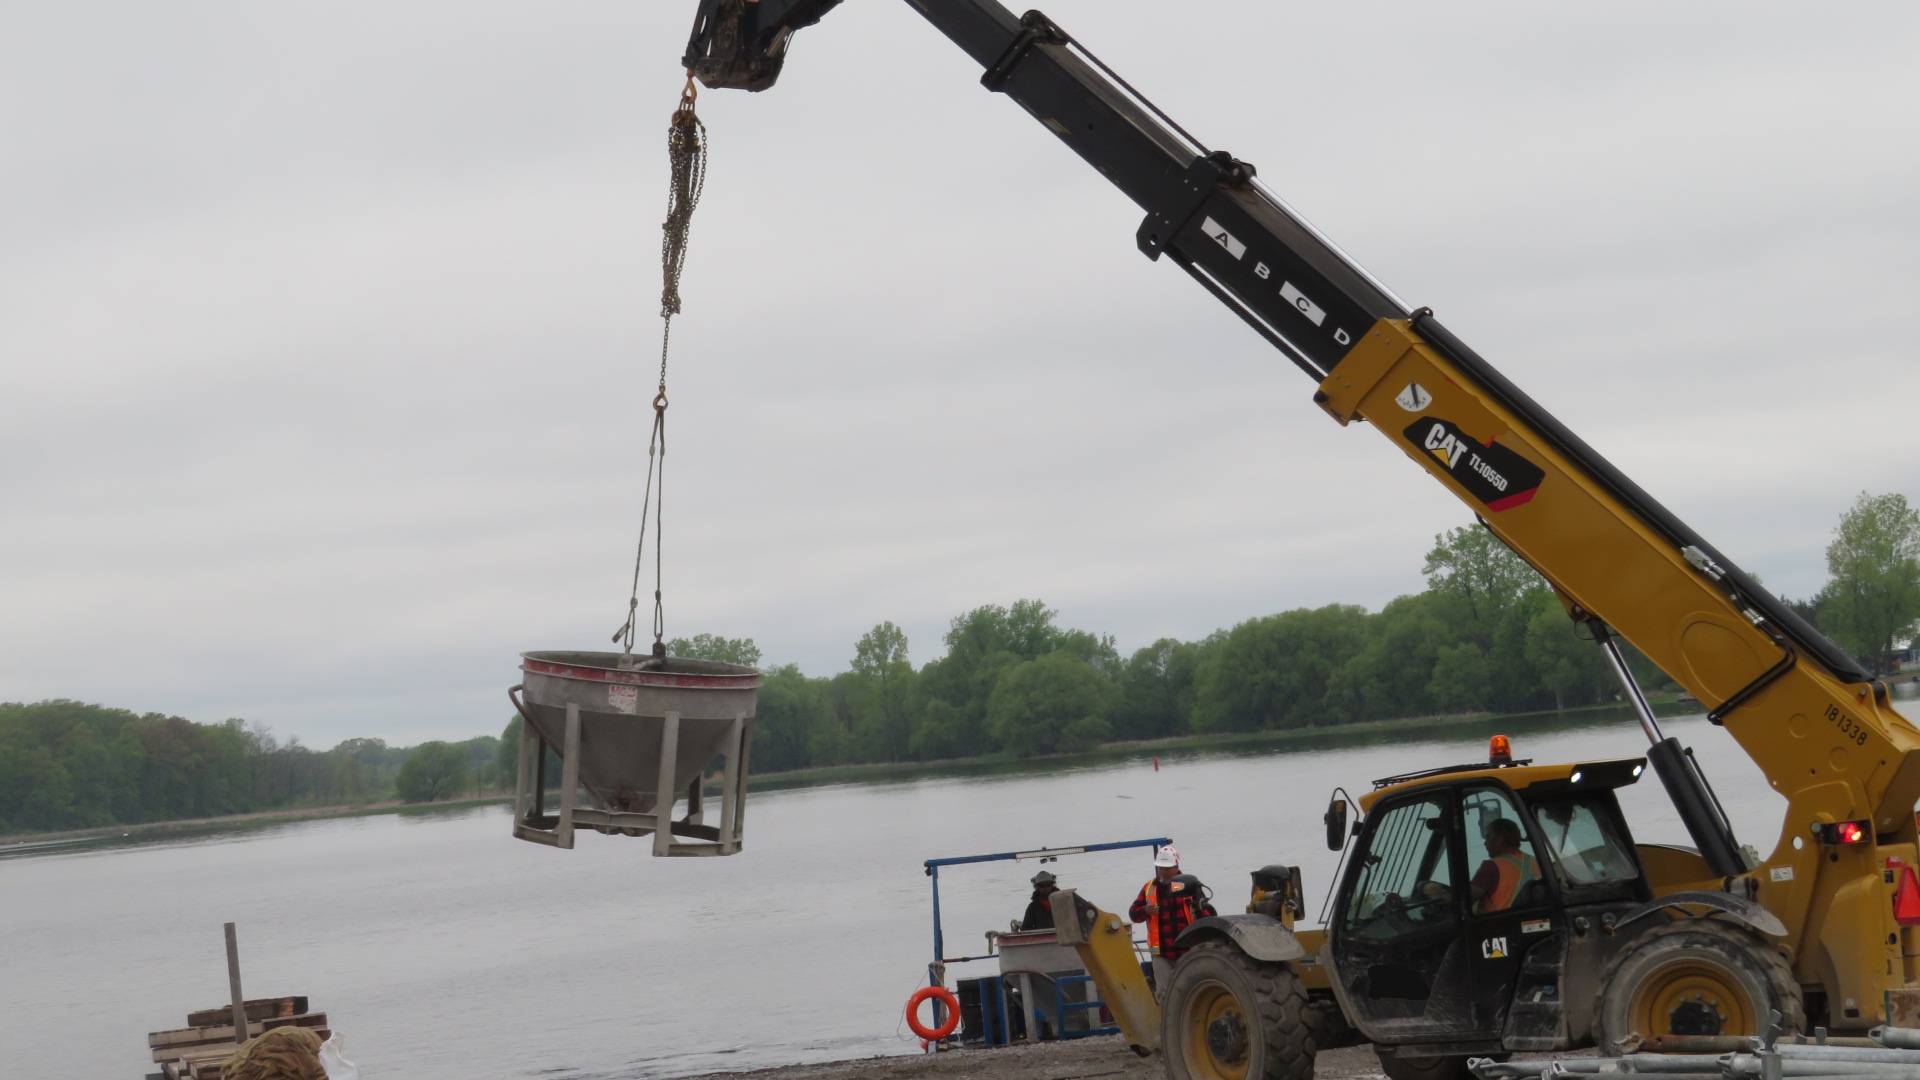 Removing the empty concrete hopper from the boat